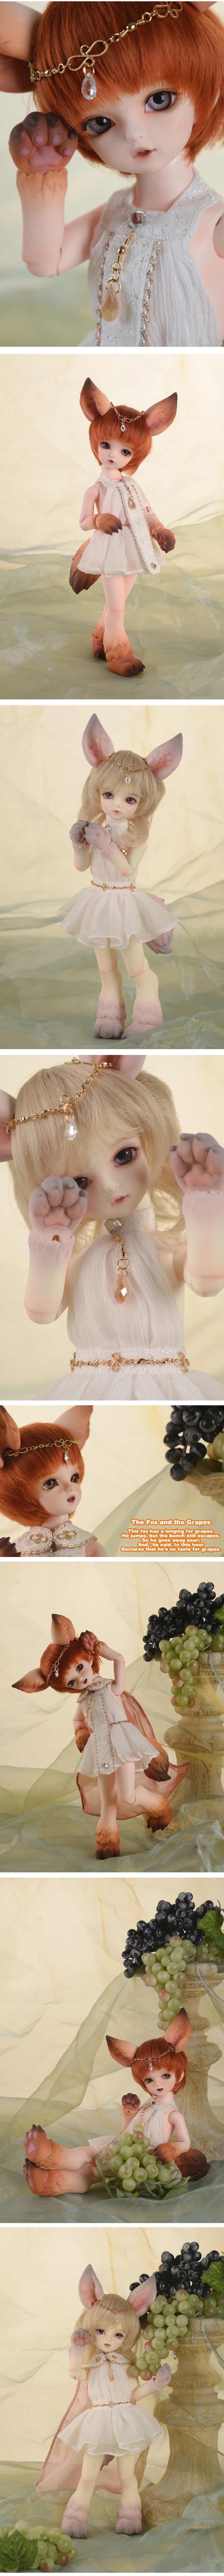 Feny & Necy  - The Fox and the Grapes bjd-2.jpg